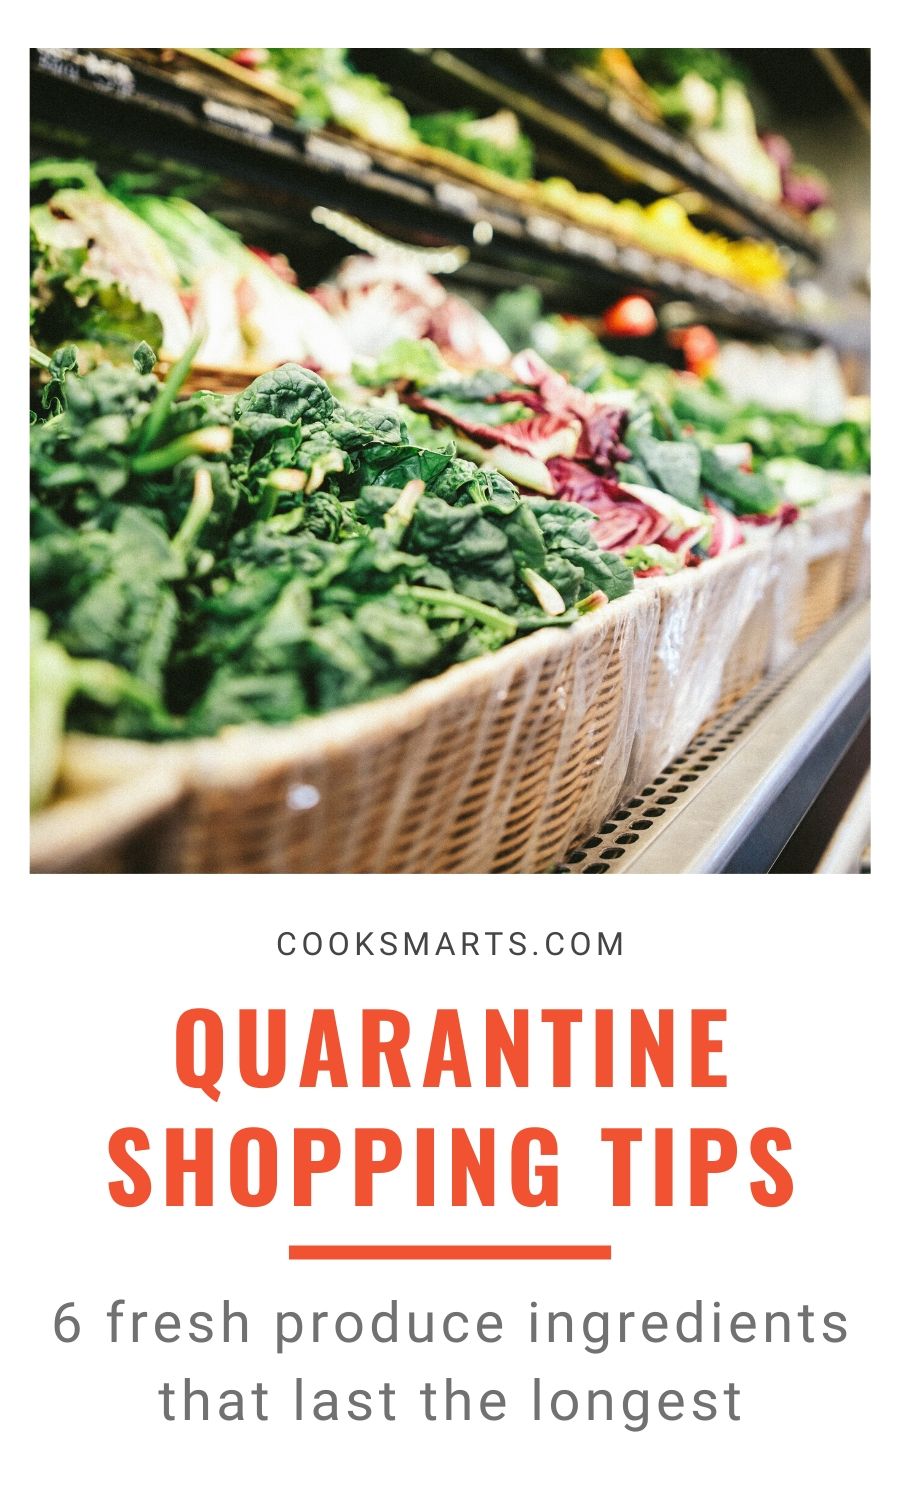 6 Long-Lasting Ingredients for Infrequent Shoppers | Cook Smarts